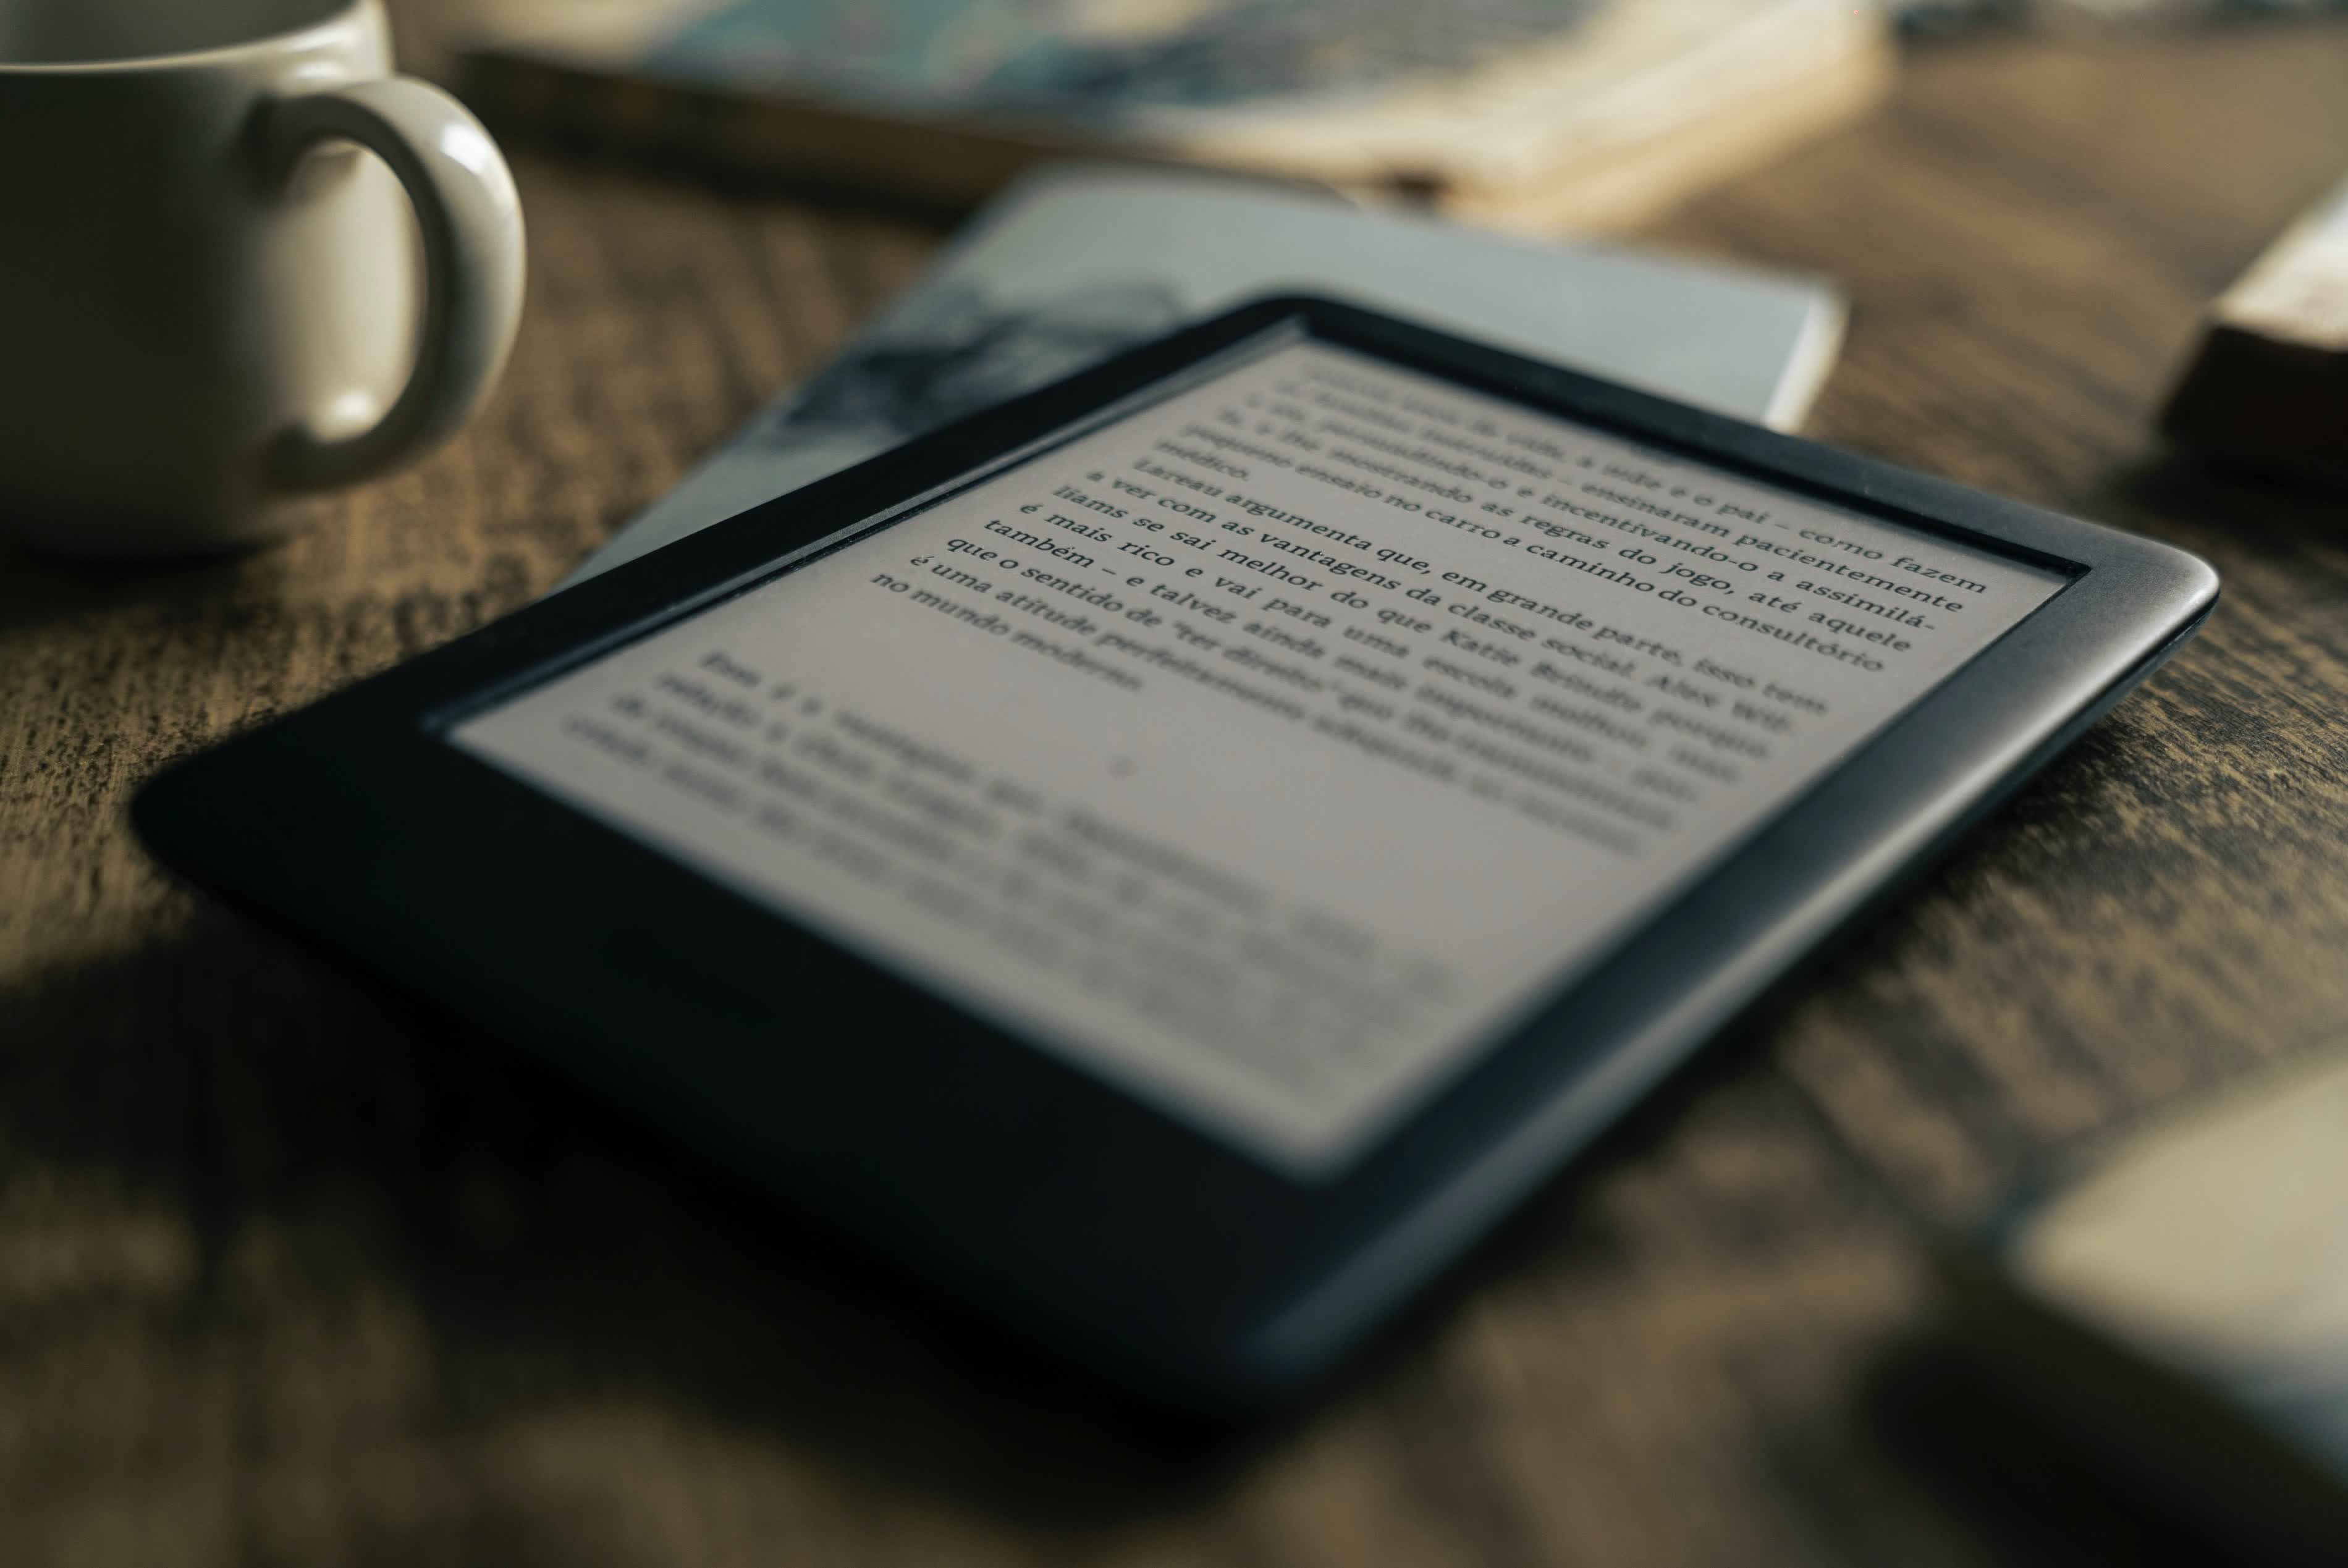 Amazon's Kindle will soon support ePub files, but there's a catch